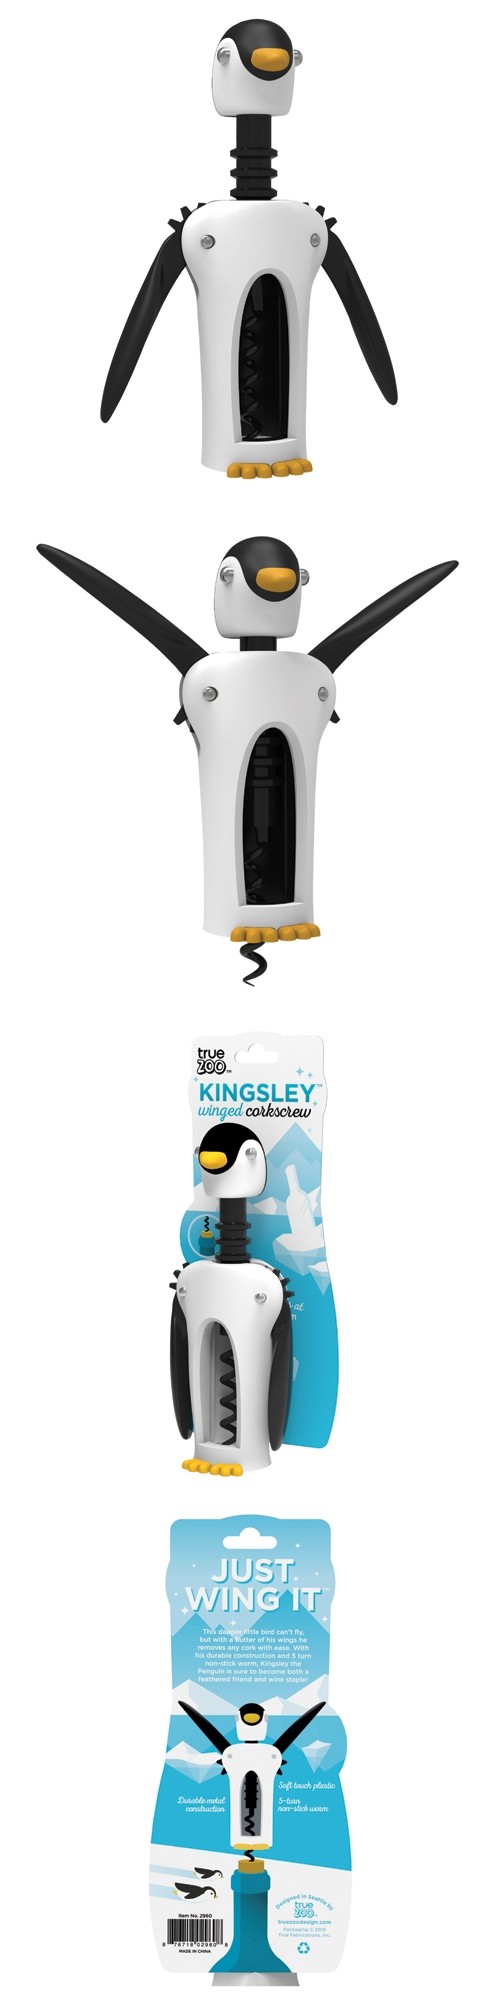 Kingsley the Penguin "Just Wing It" Winged Corkscrew